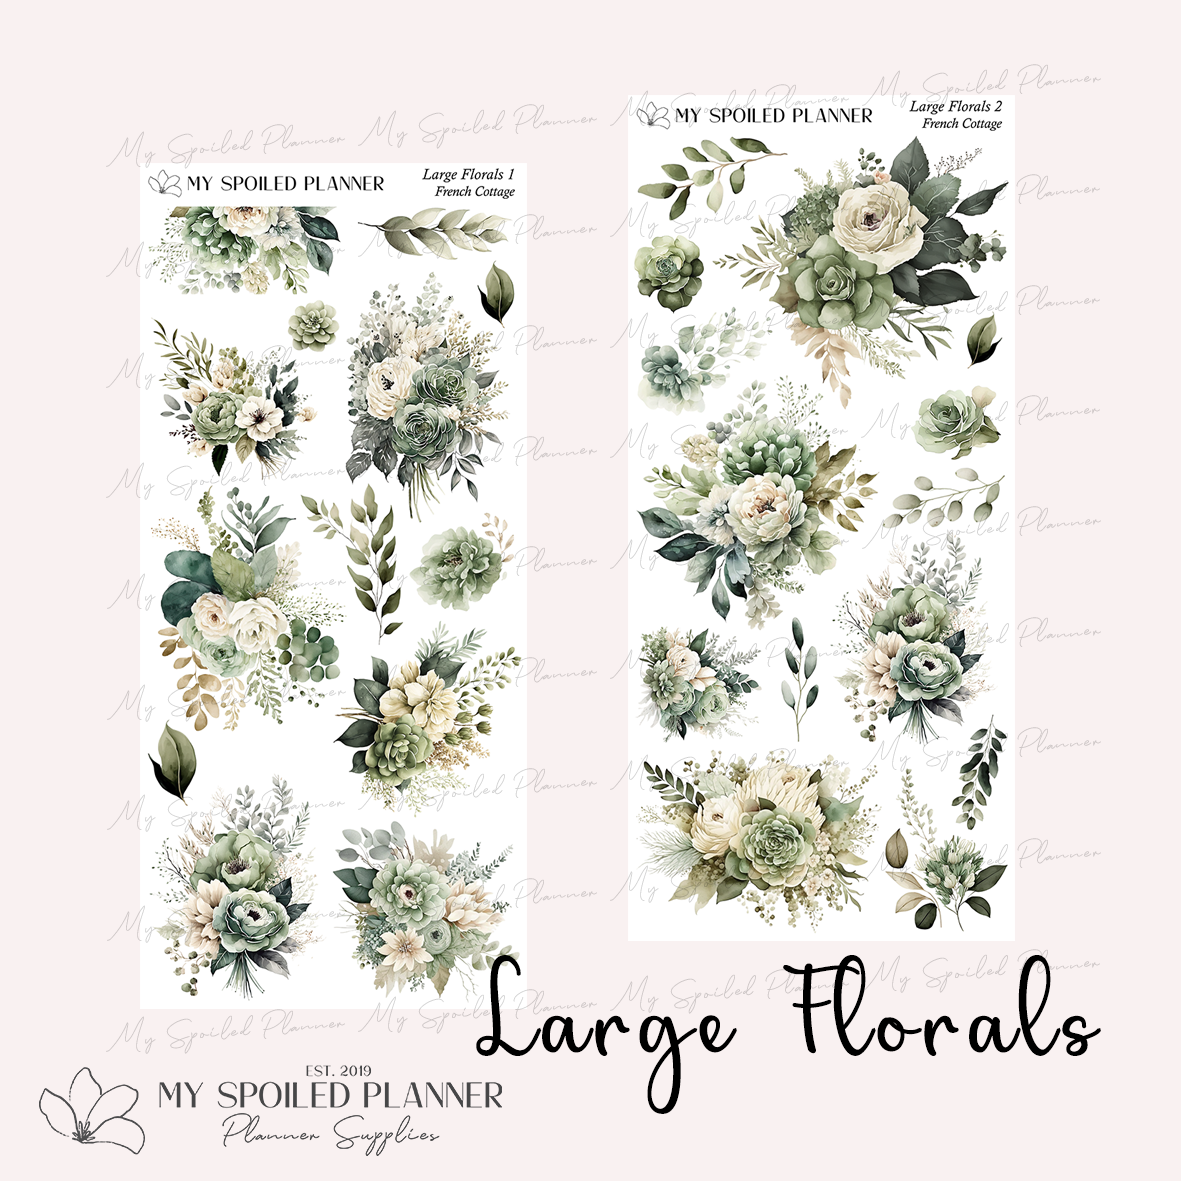 French Cottage Large Florals